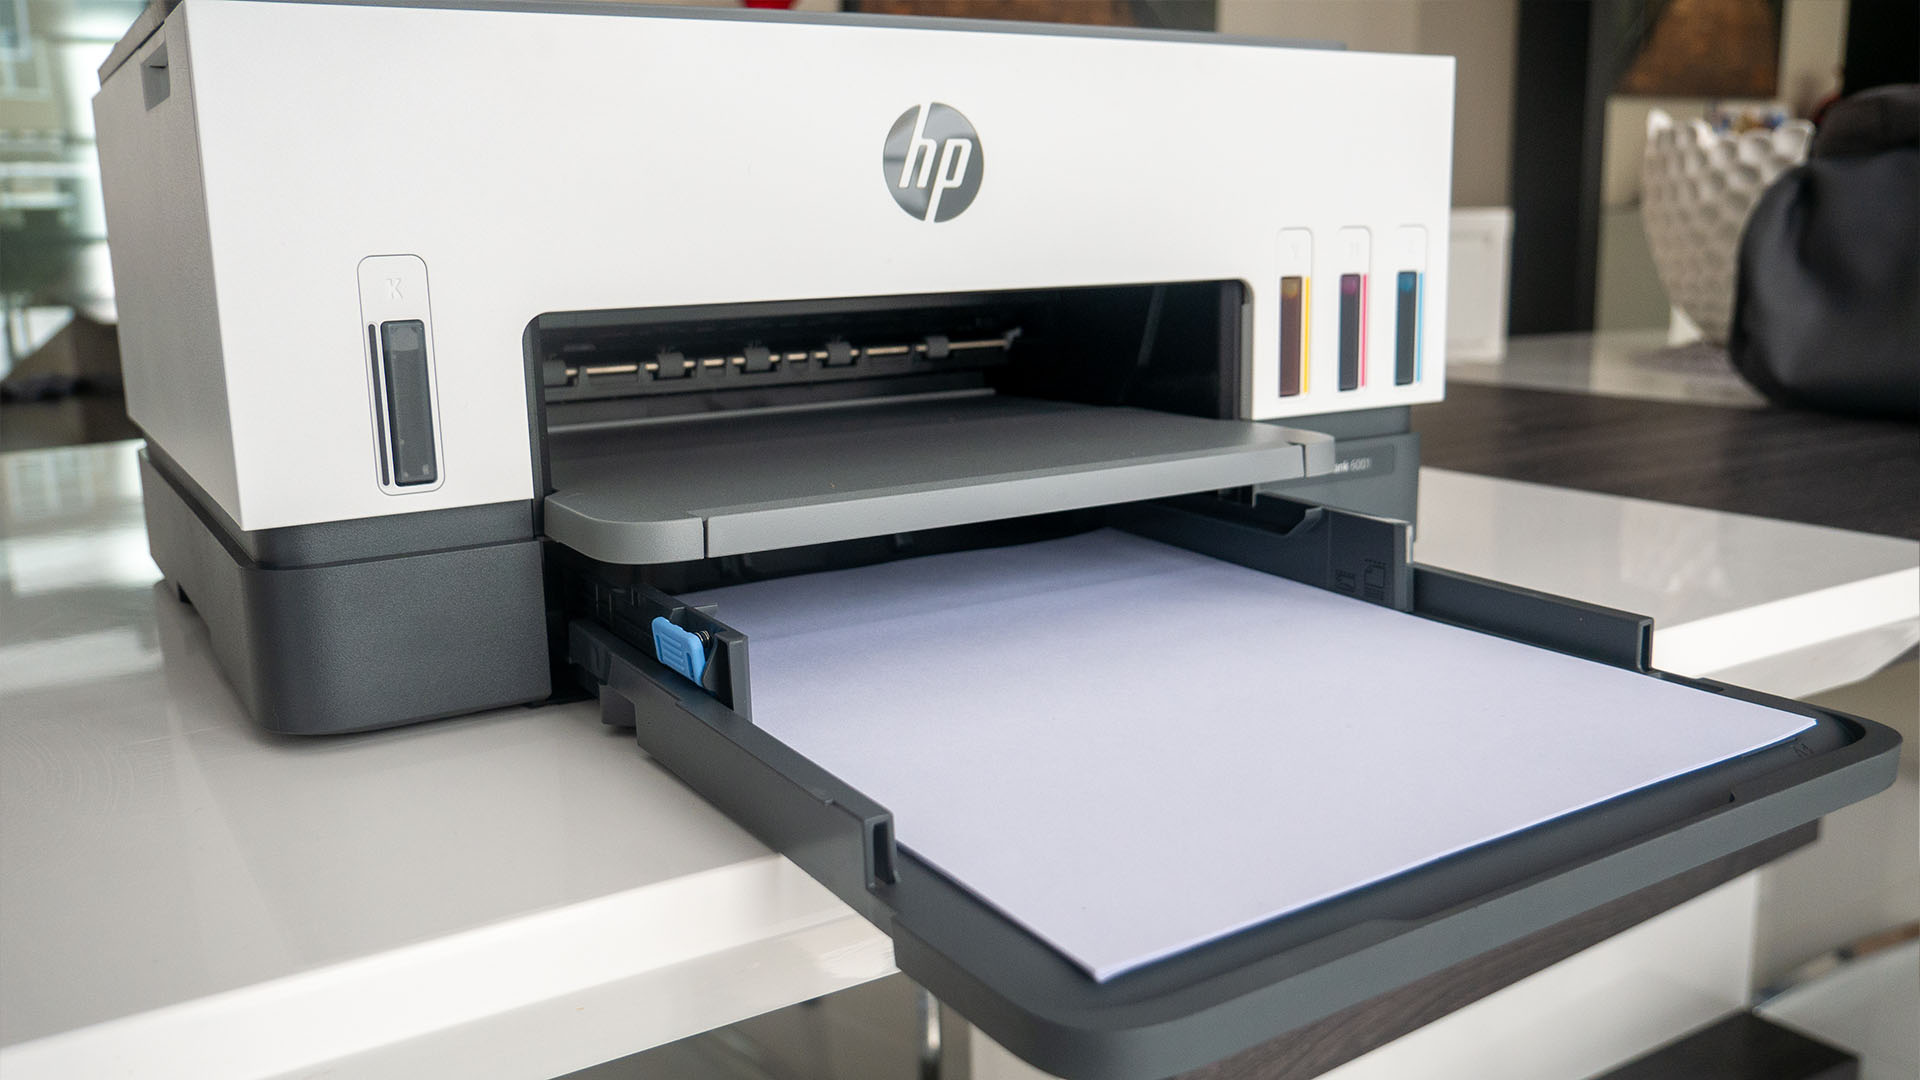 Image of HP Smart Tank 6001 printer with paper on table